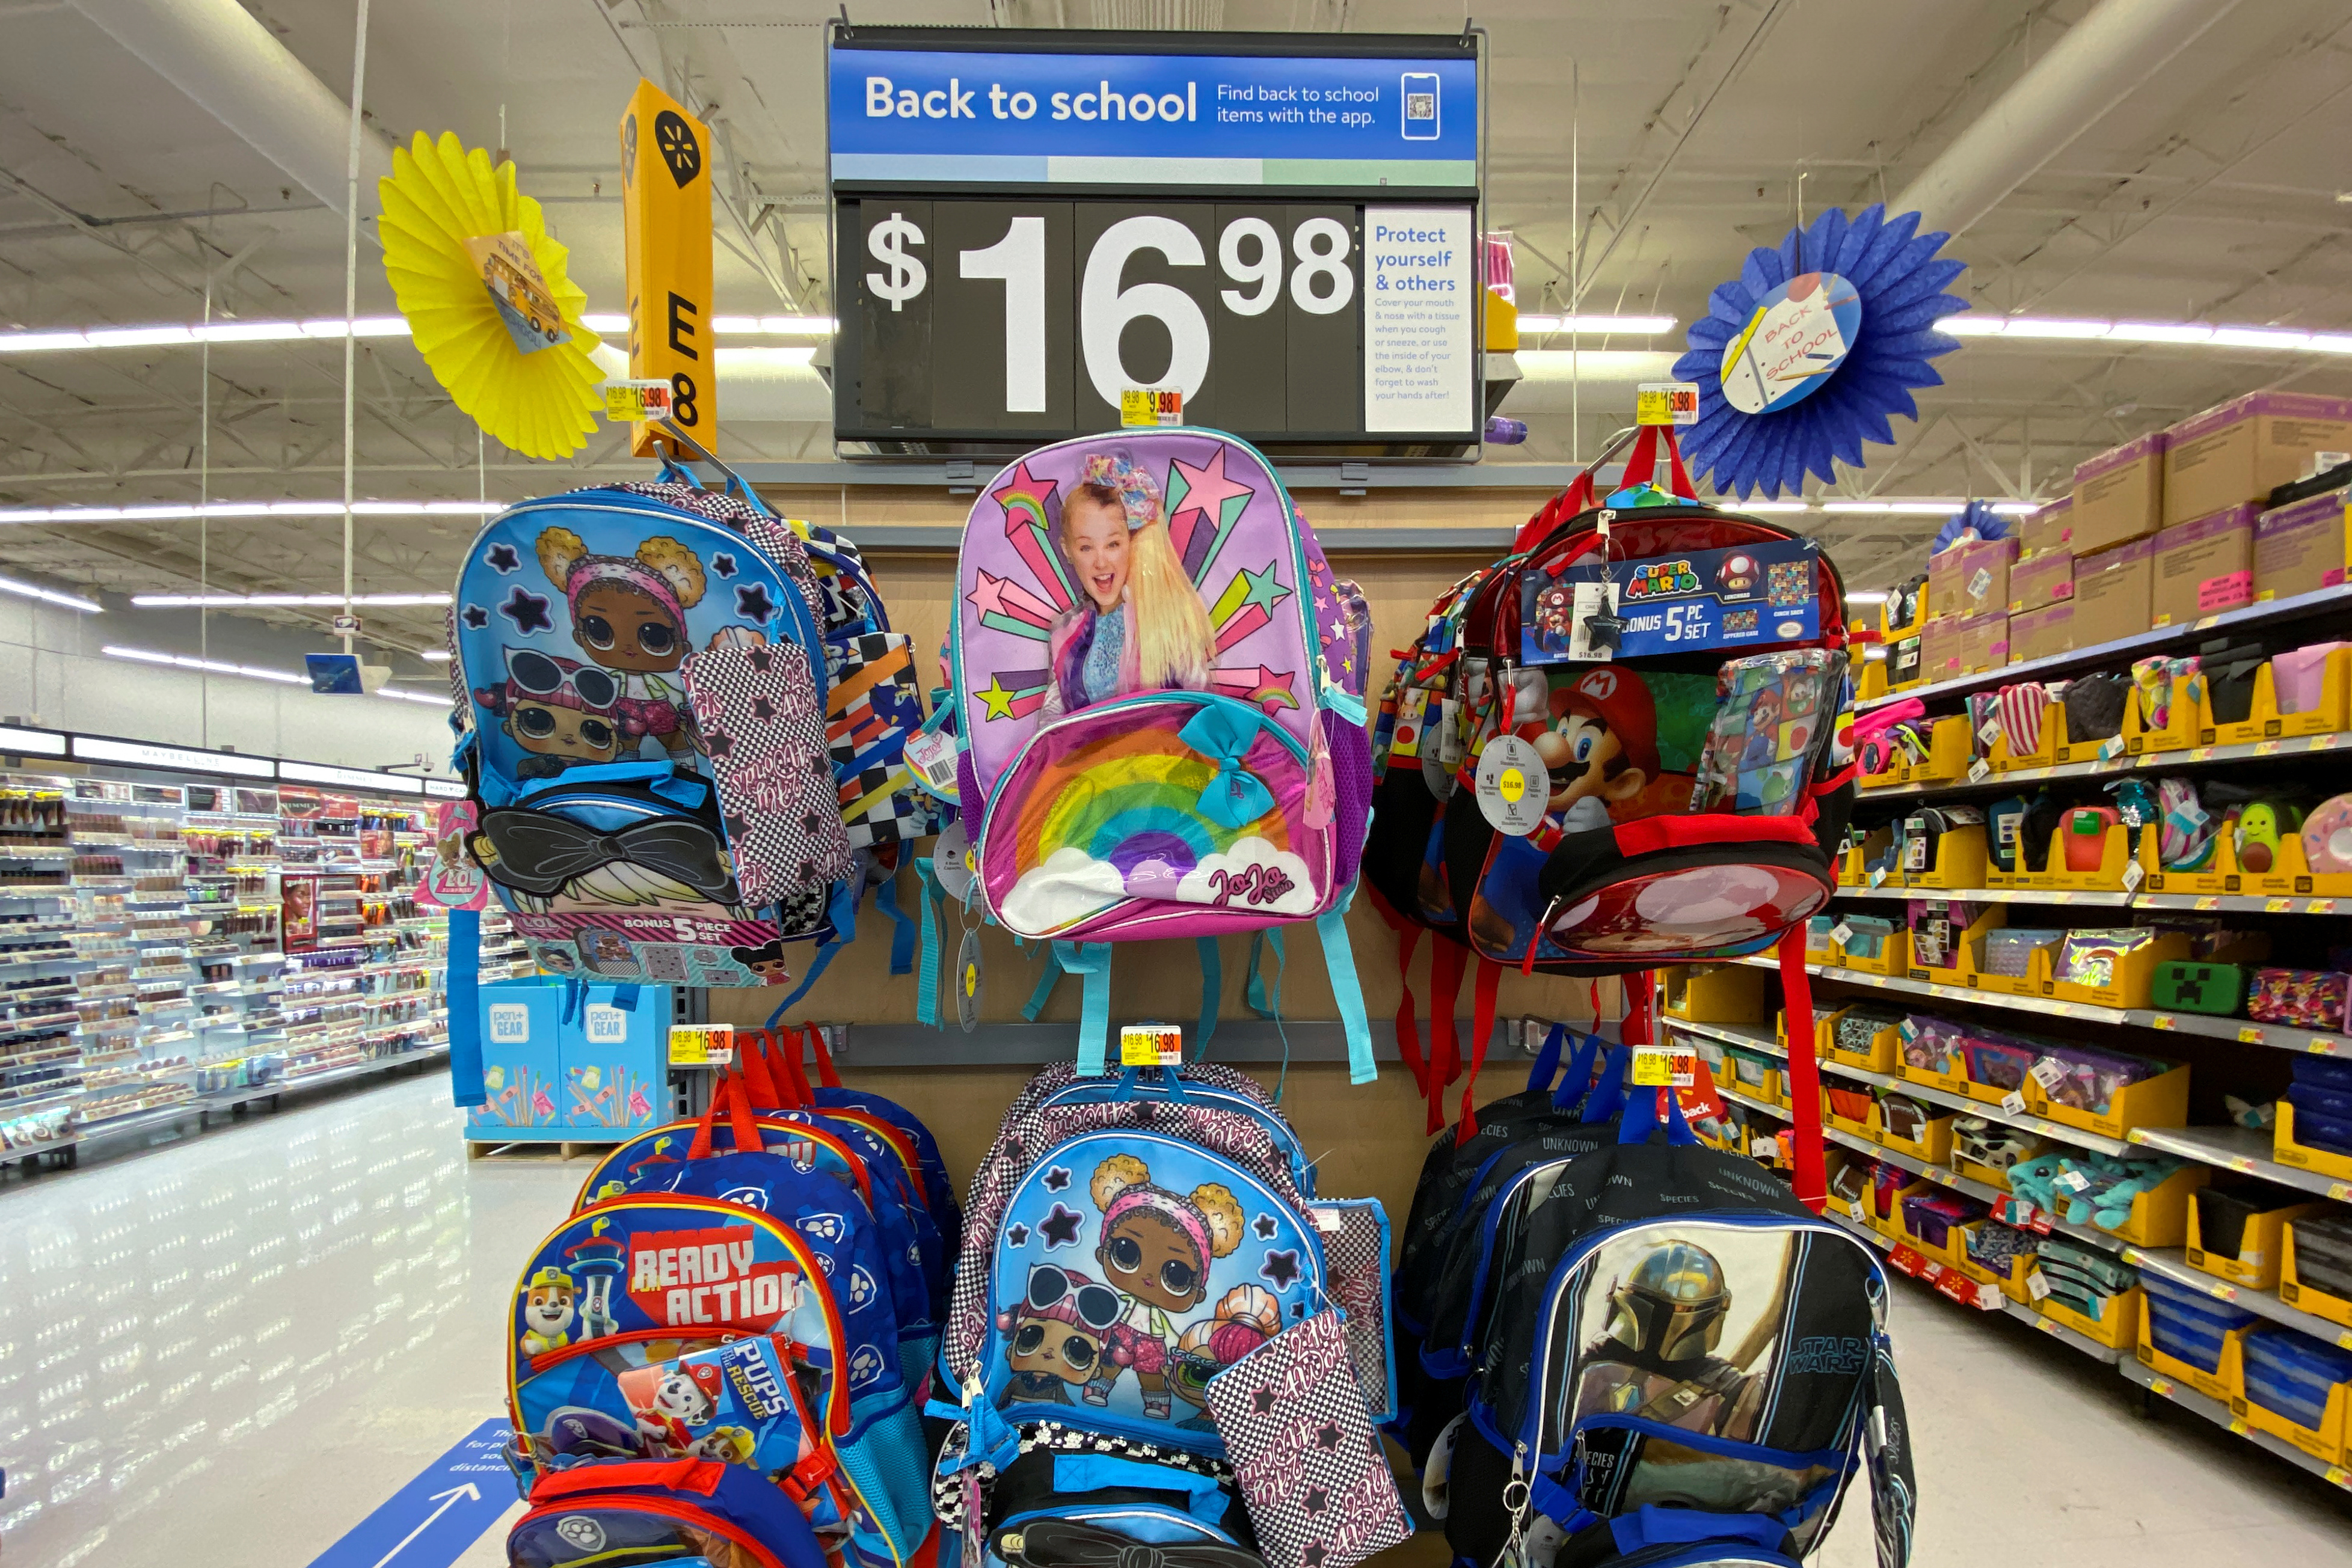 Back to school supplies are shown for sale at a Walmart store during the outbreak of the coronavirus disease (COVID-19) in Encinitas, California, U.S., July 28, 2020.      REUTERS/Mike Blake